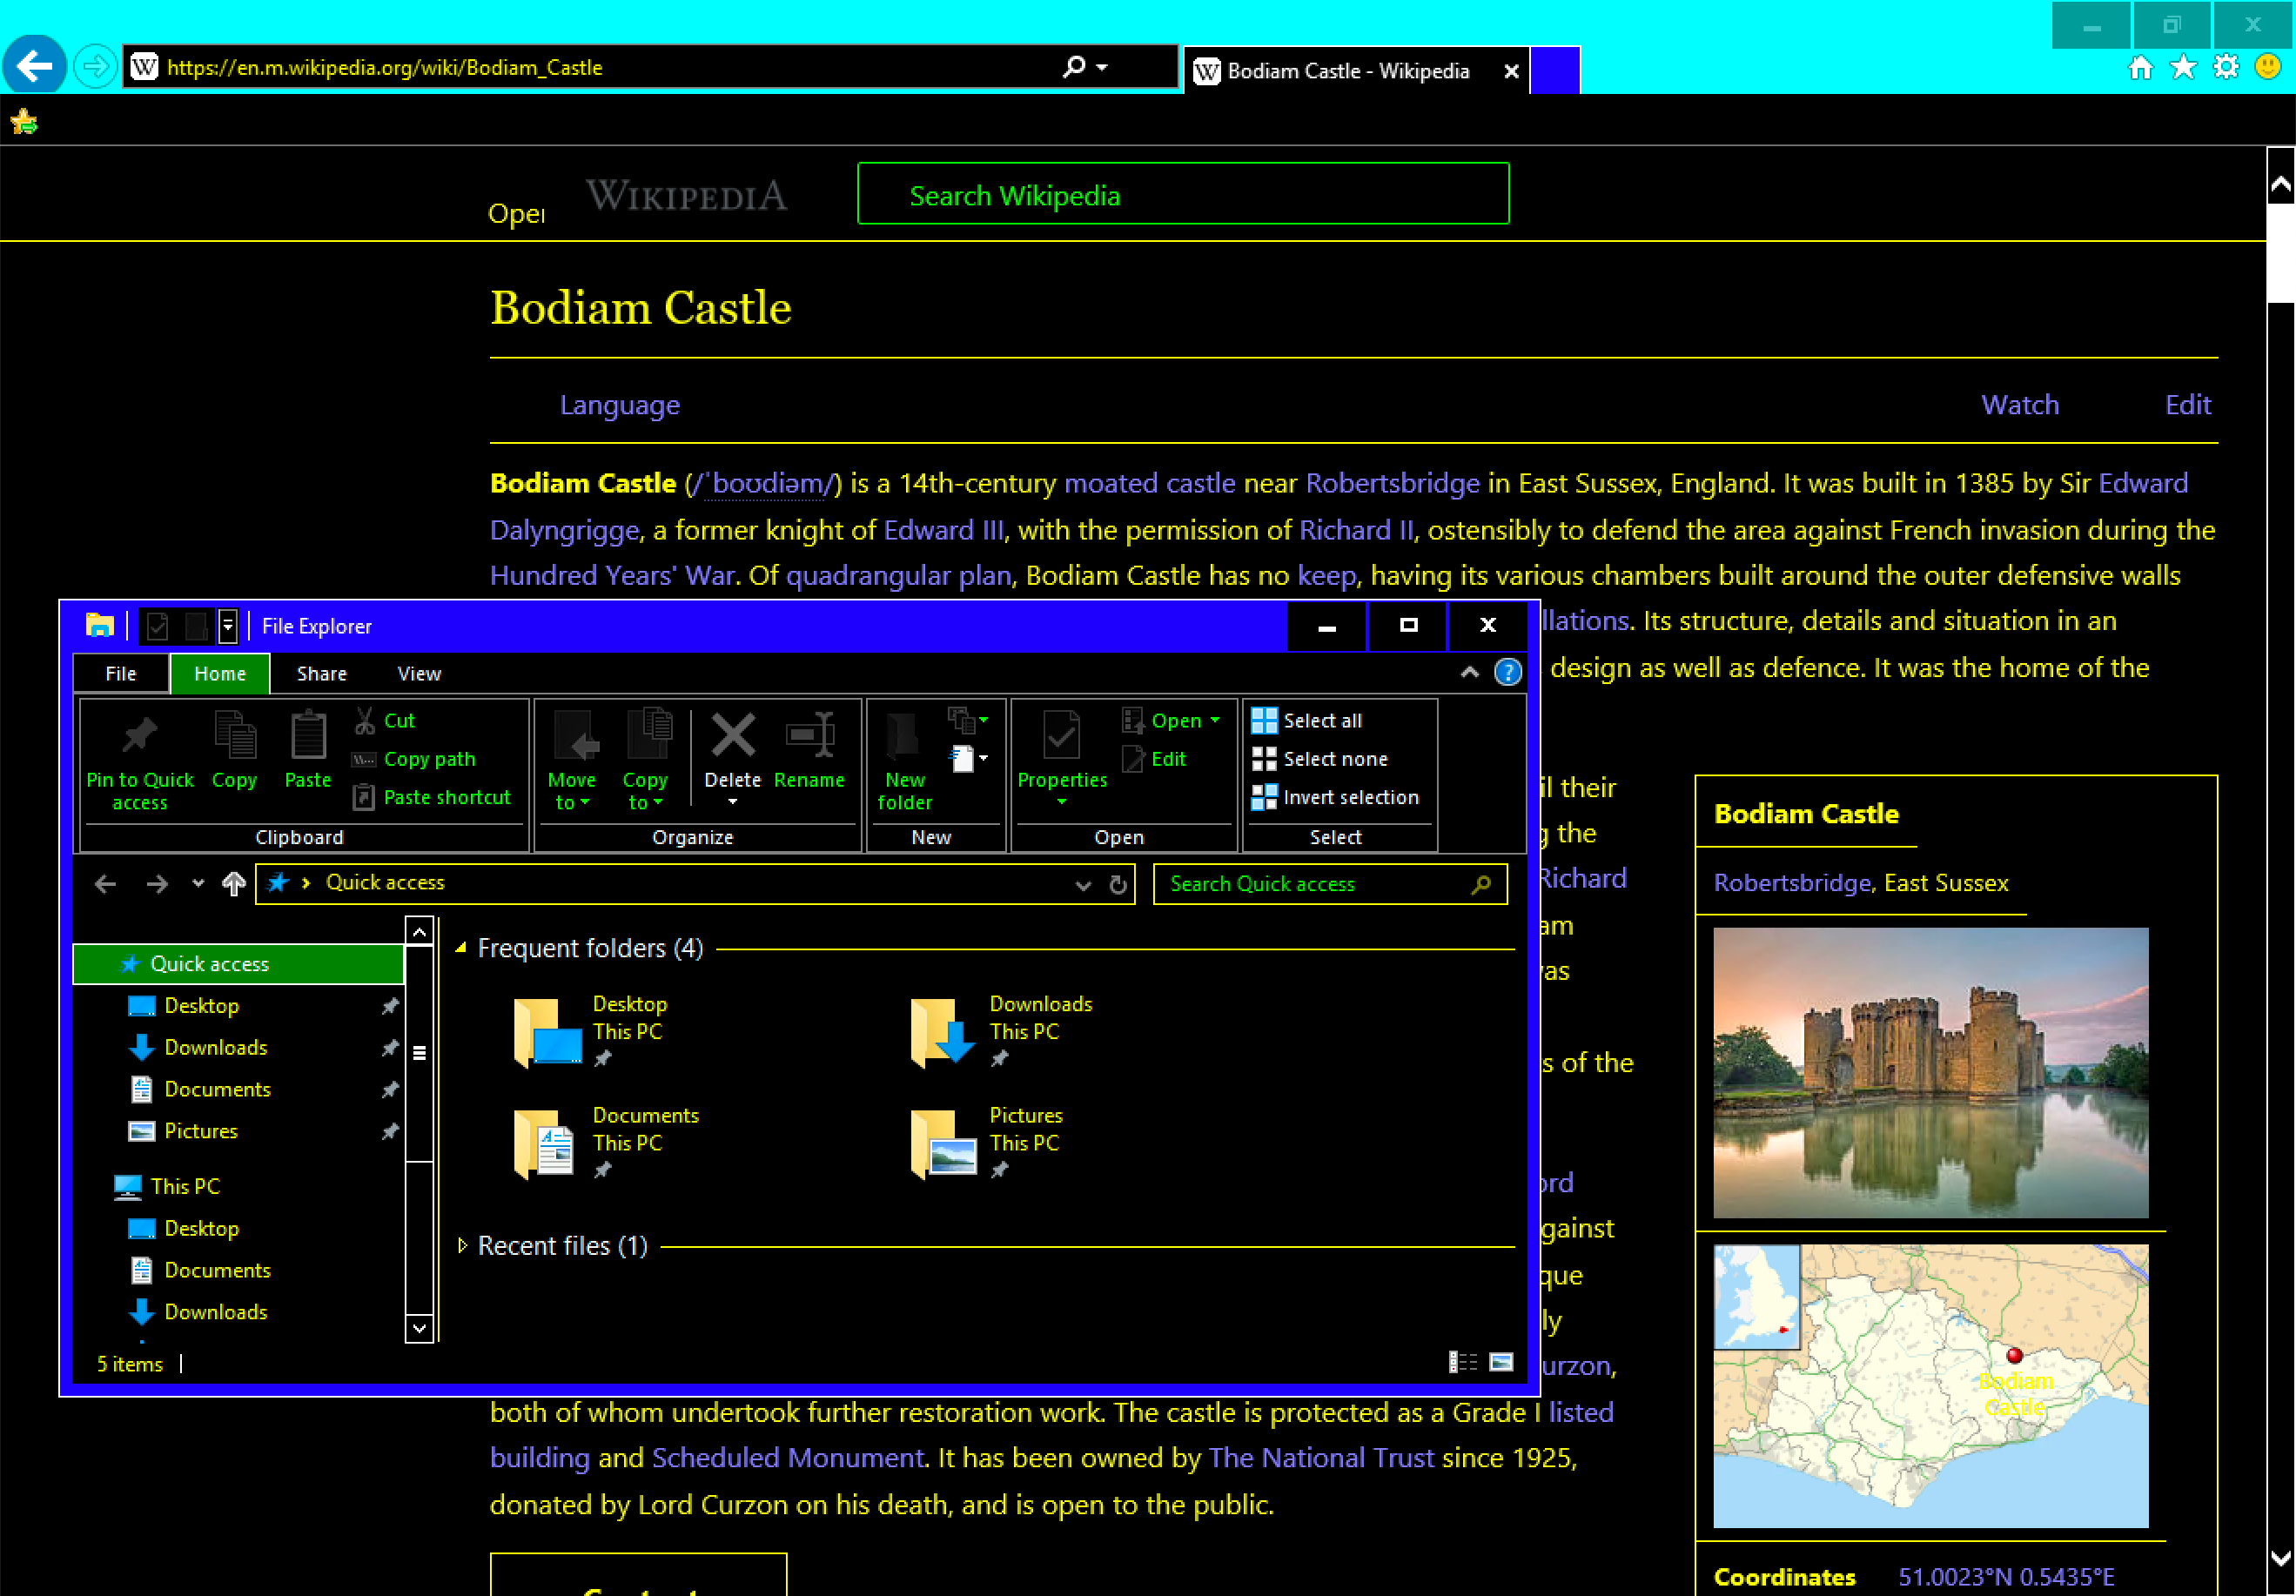 Screenshot of High Contrast Mode running on Windows 10. A Wikipedia page for Bodiam Castle is in the background, displayed in Internet Explorer 11. In the foreground is a window showing Window’s File Explorer. Content for both the Operating System UI and web content have been updated to display high contrast color values.